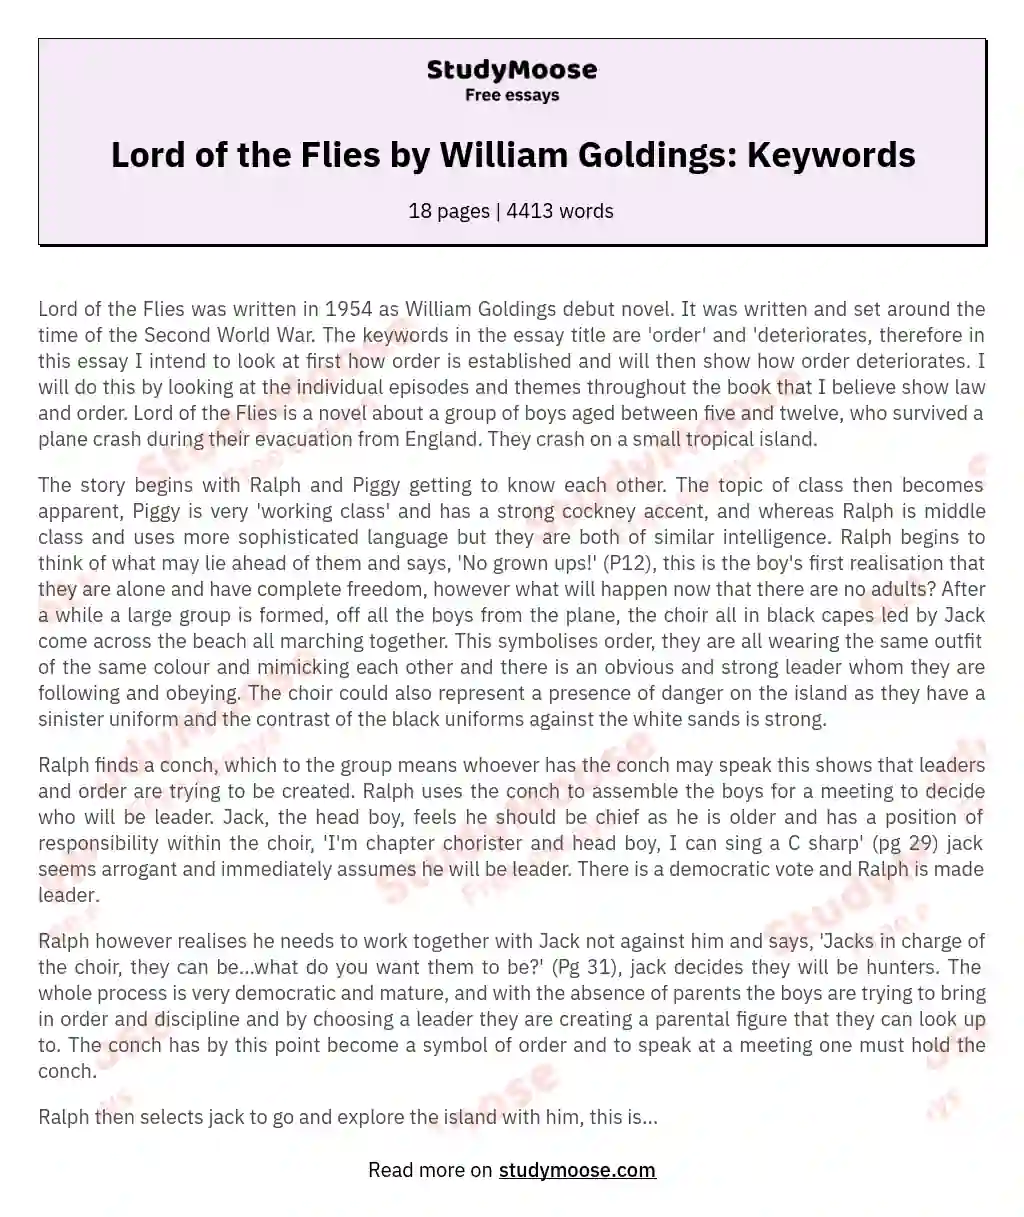 Lord of the Flies by William Goldings: Keywords essay